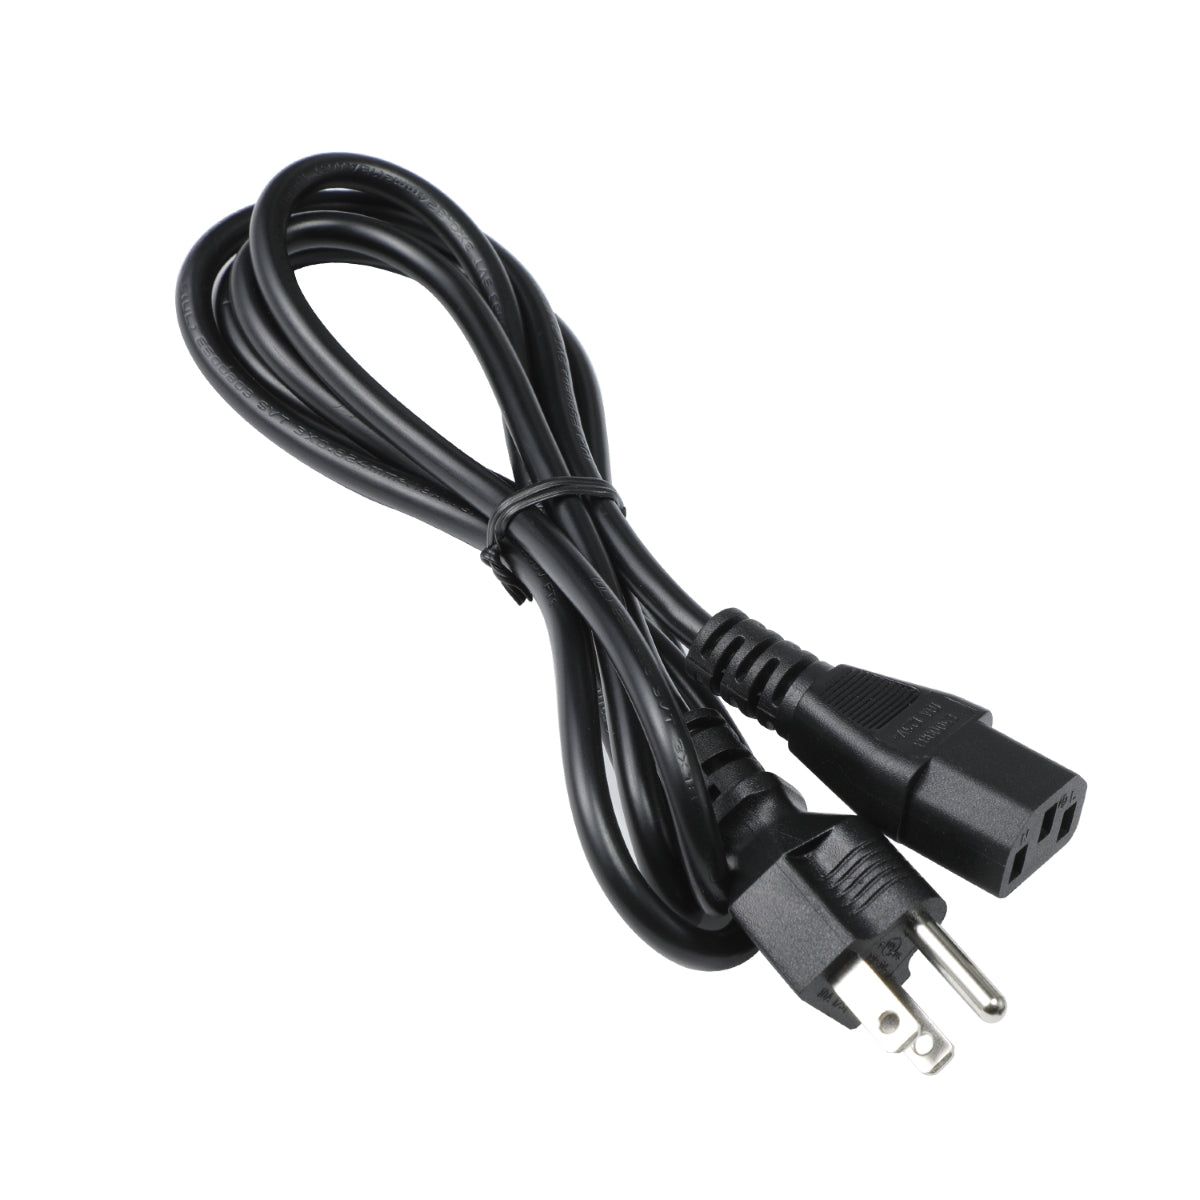 Power Cord for Brother Printer